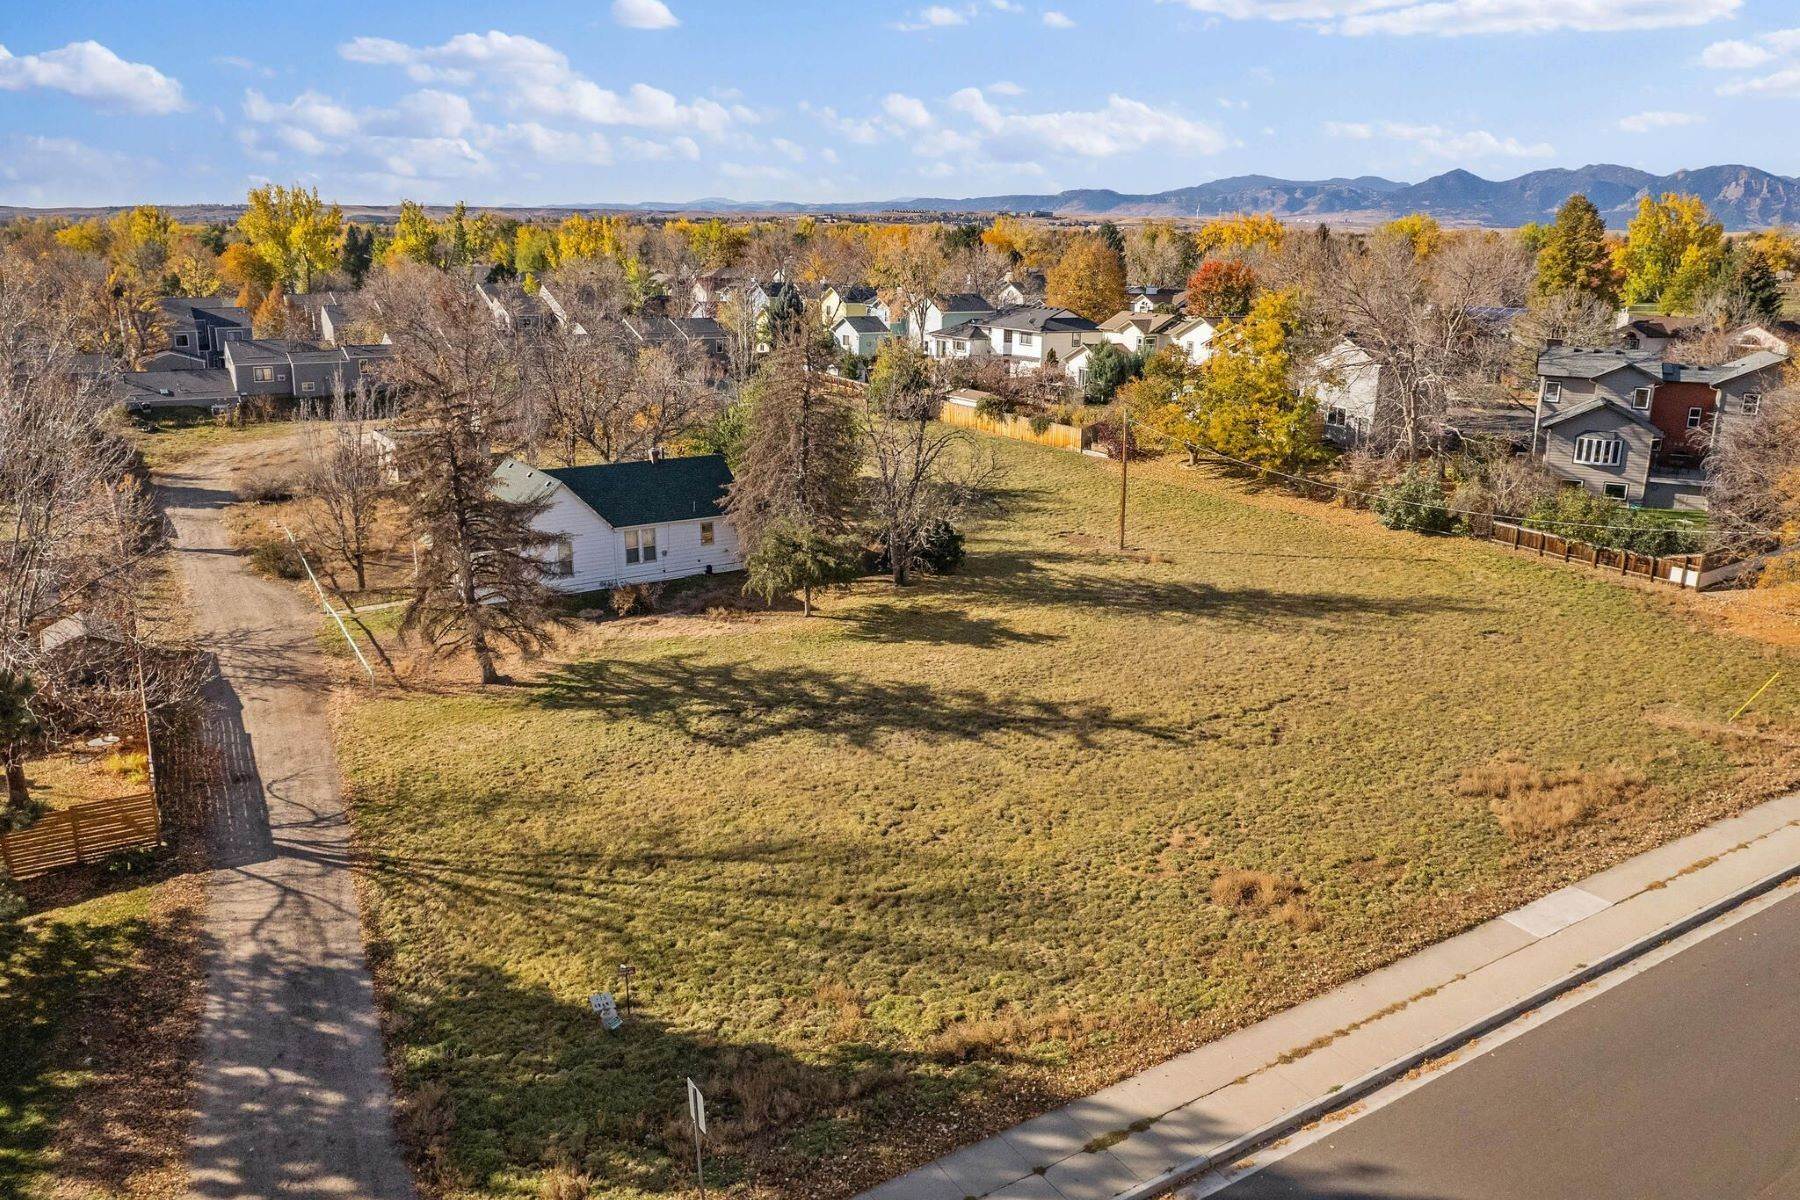 Single Family Homes for Active at Unique Chance To Own And Develop 1.67 Acres In The Heart Of Louisville 425 Grant Avenue Louisville, Colorado 80027 United States